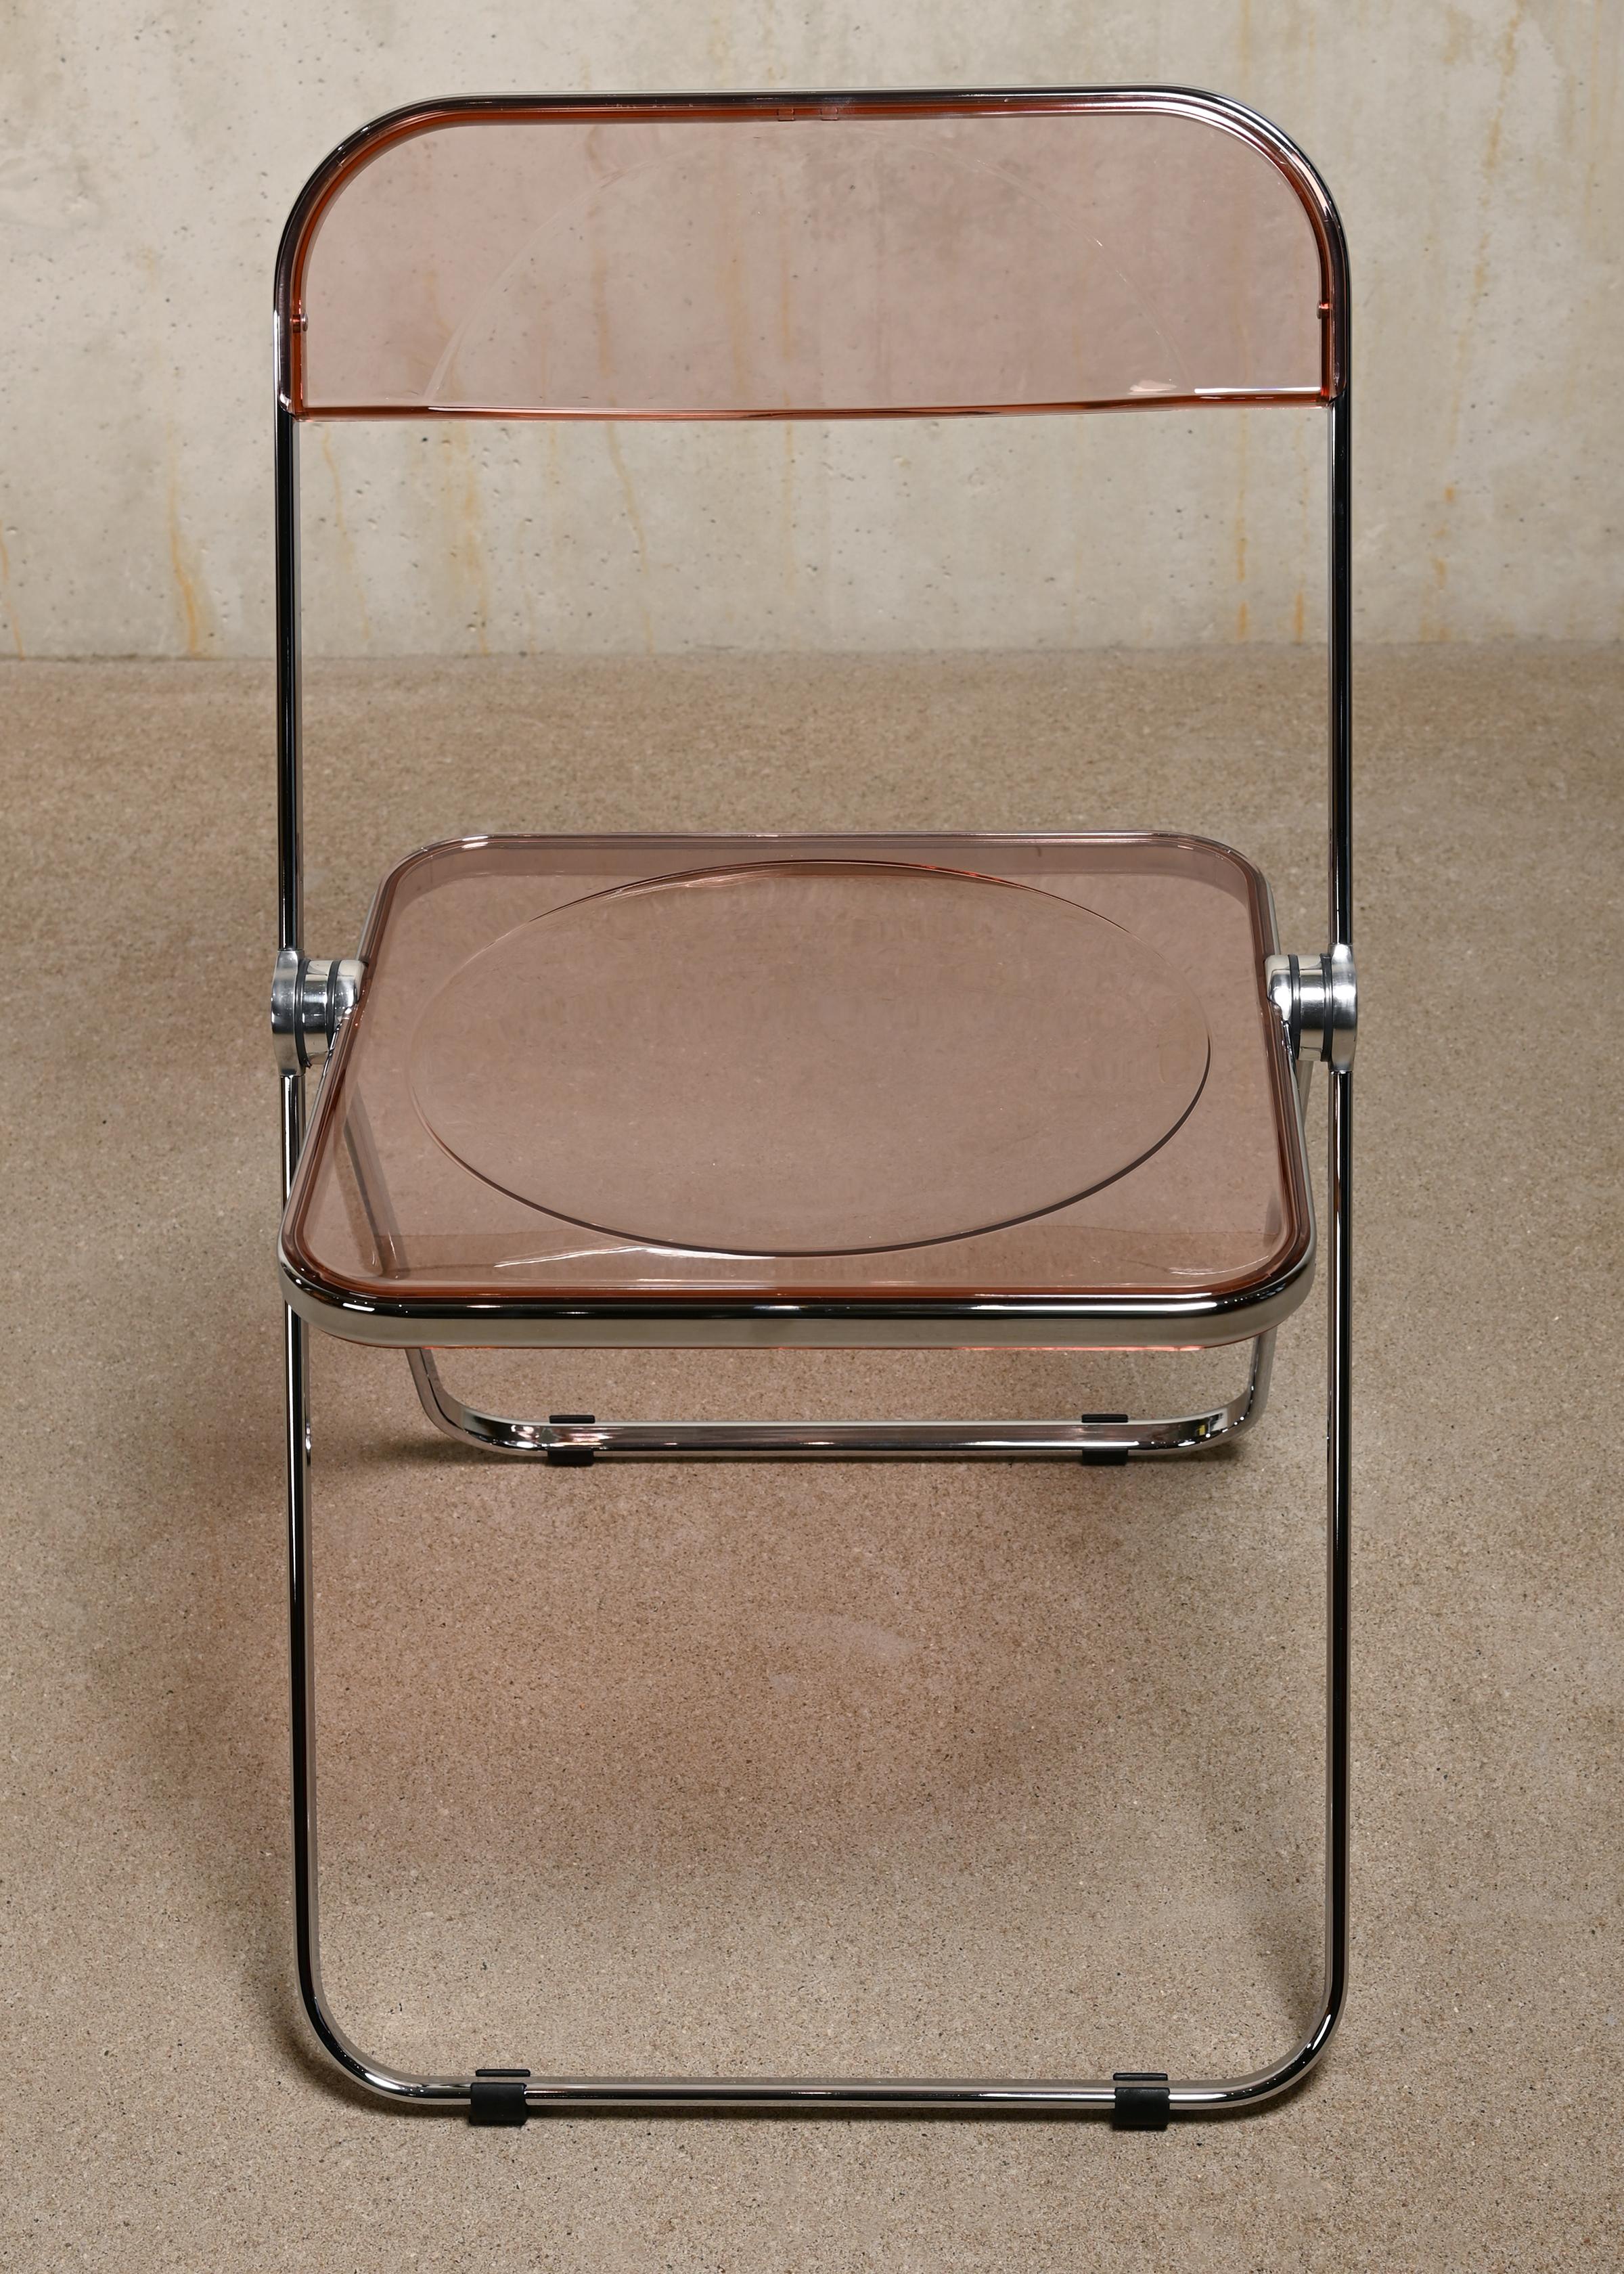 Giancarlo Piretti Plia Set Folding Chairs in Lucite Pink and Chrome for Castelli For Sale 4